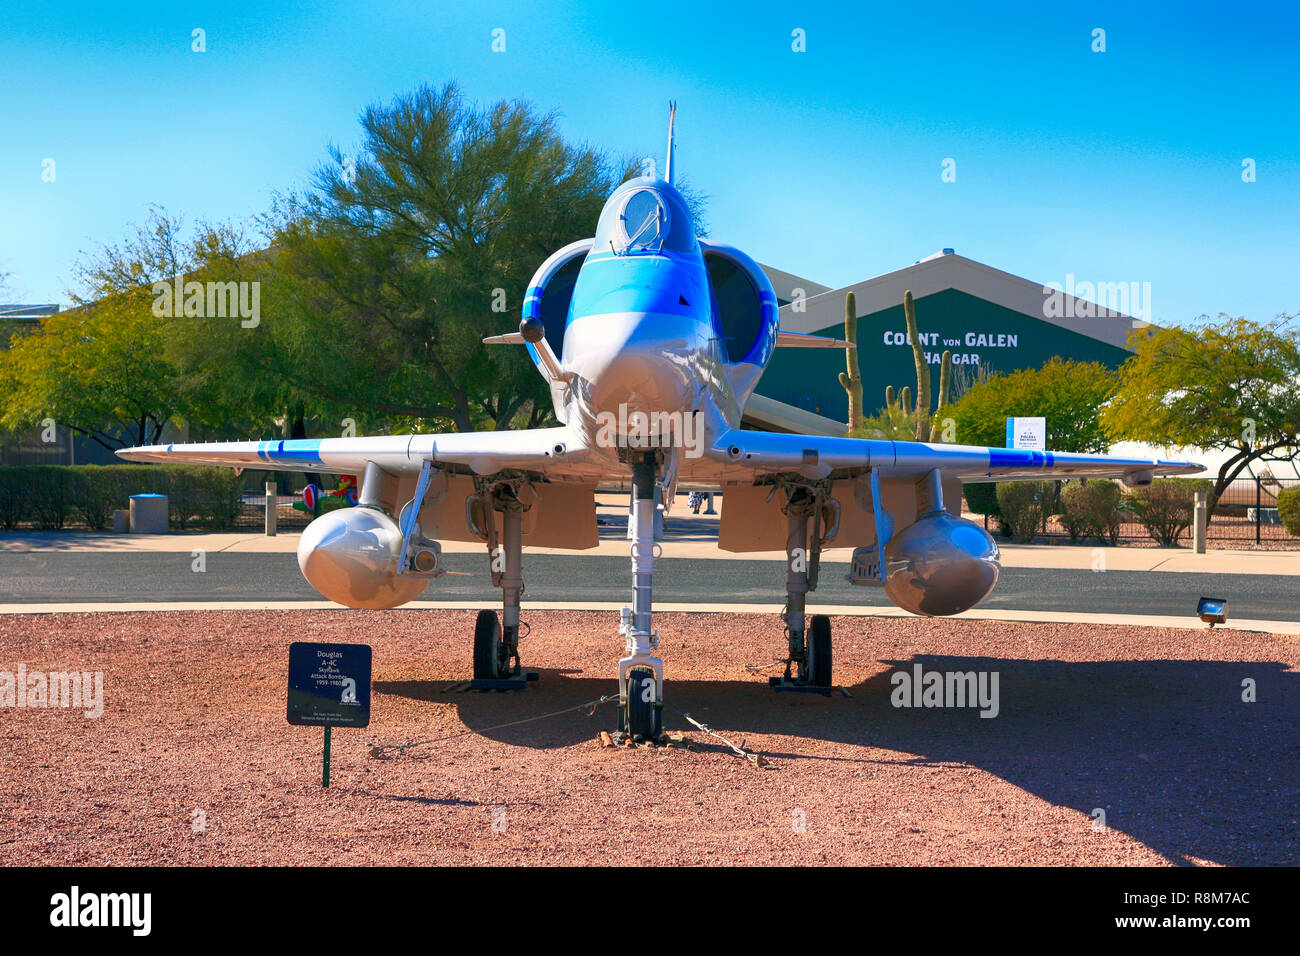 Douglas A4C Skyhawk fighter jet plane at the entrance to the Pima Air & Space Museum in Tucson, Arizona Stock Photo